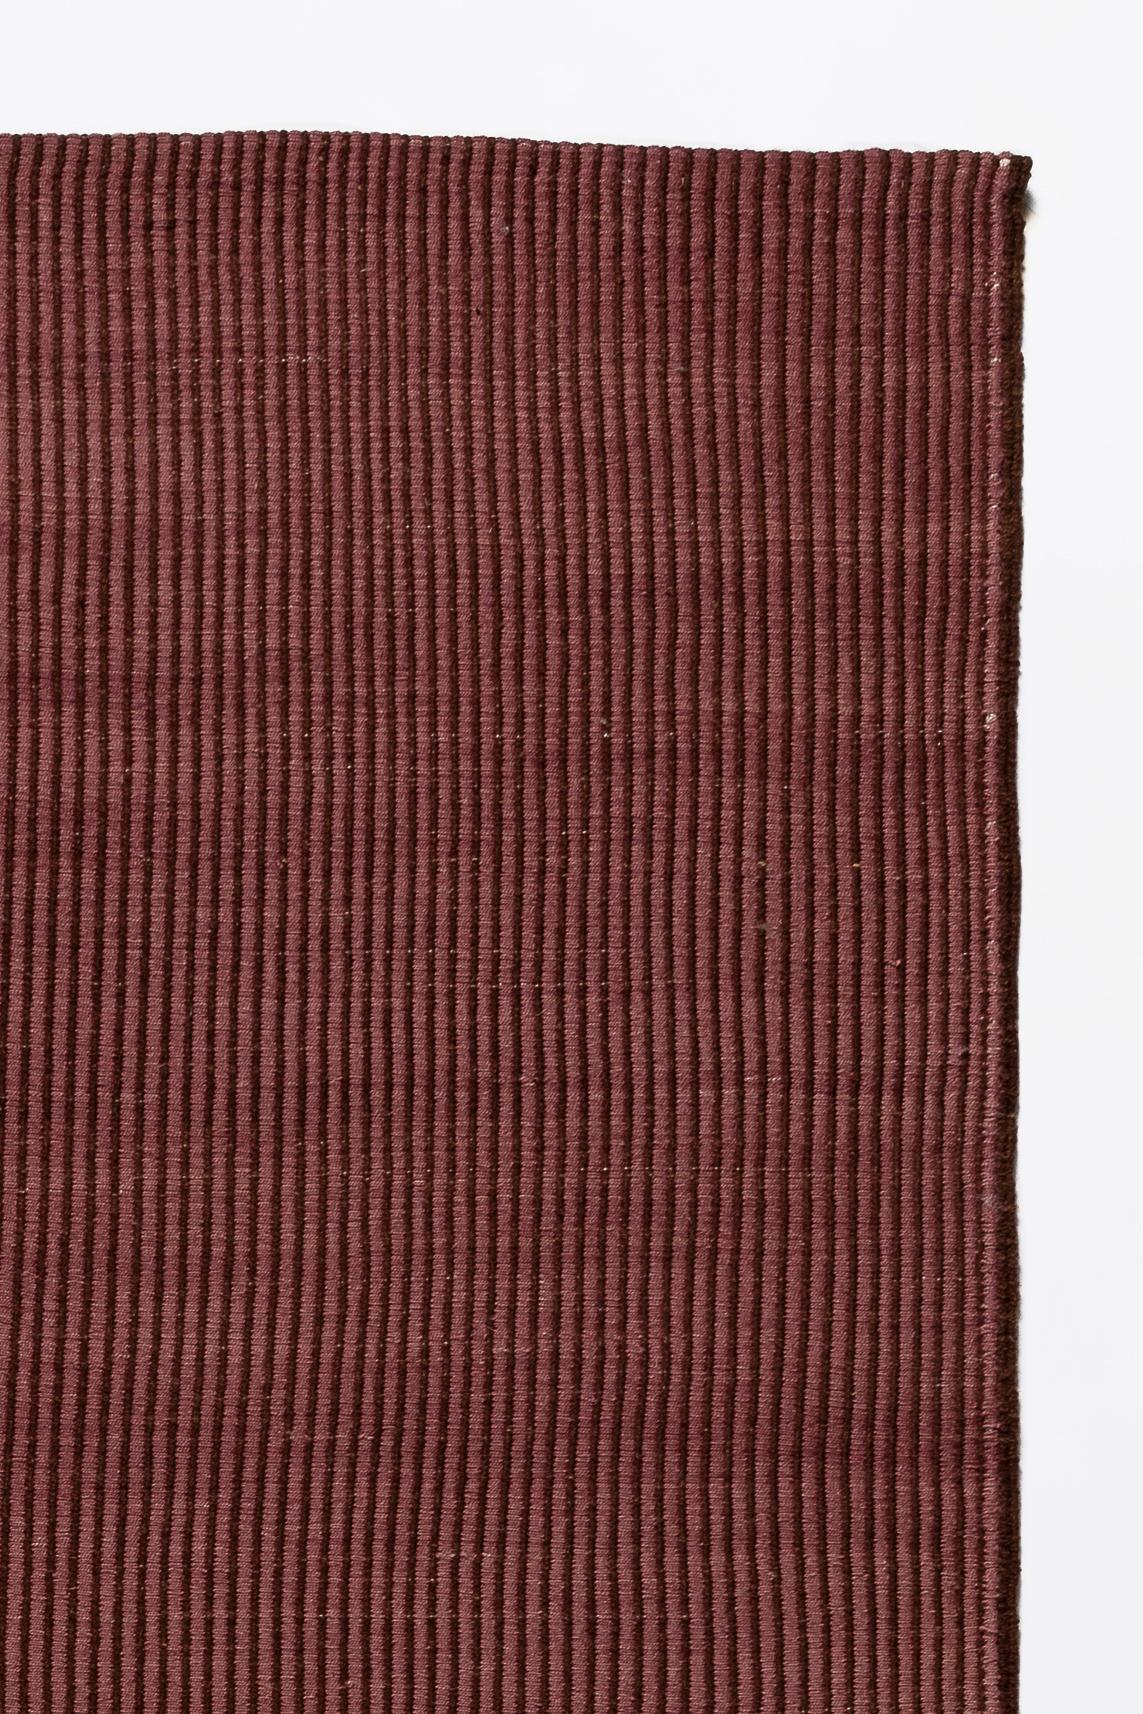 Turkish Haze Editions Contemporary Kilim Area Rug Wool Handwoven in Brown and Dusty Rose